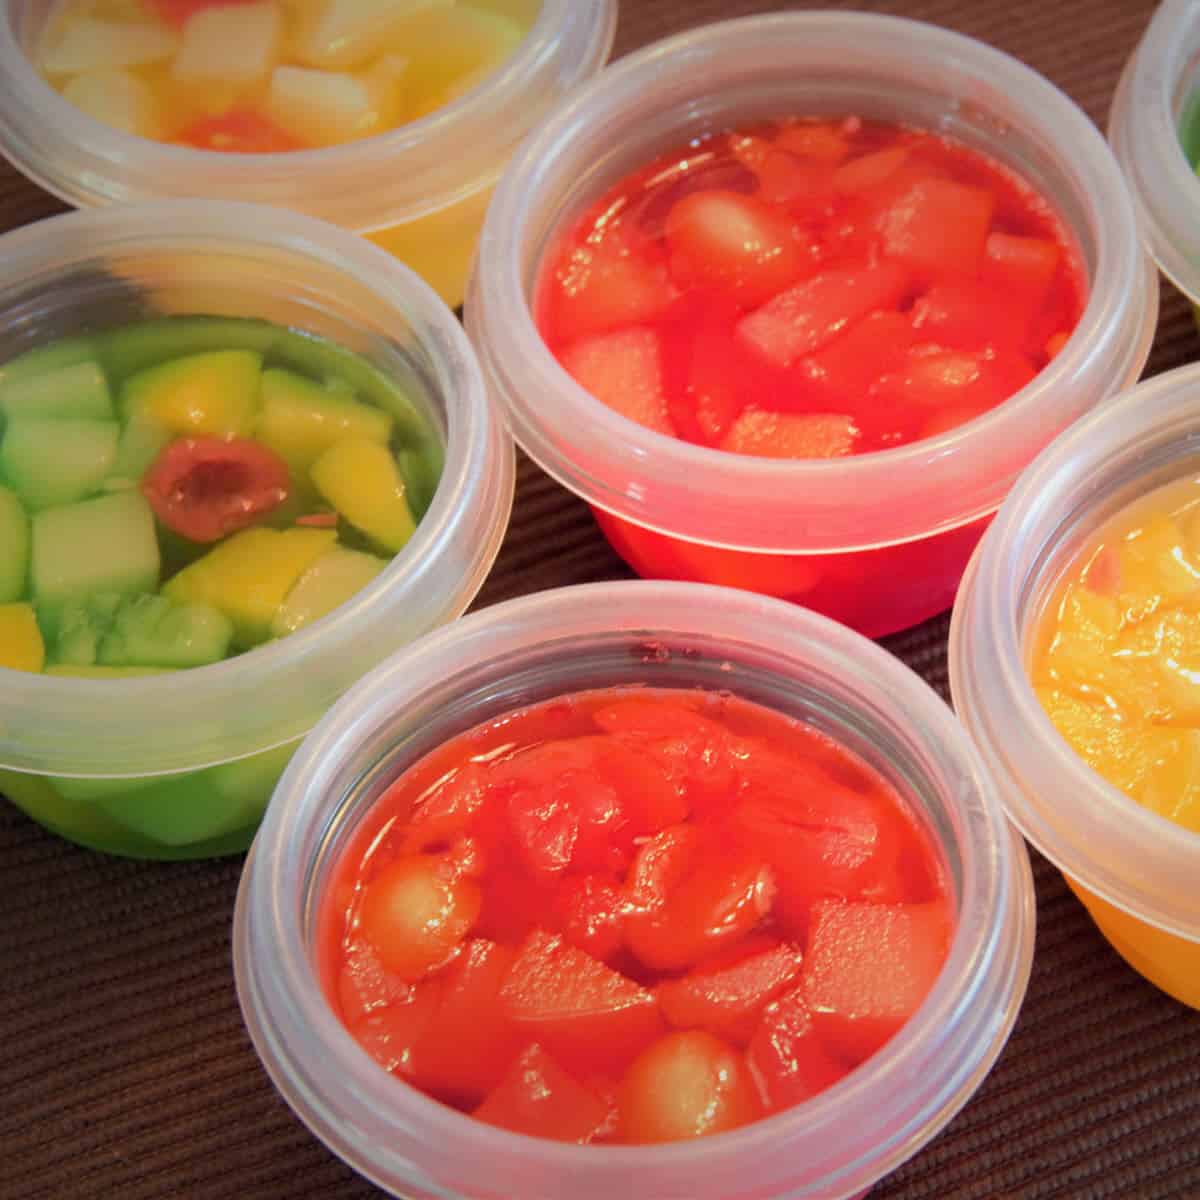 jello cups with fruit